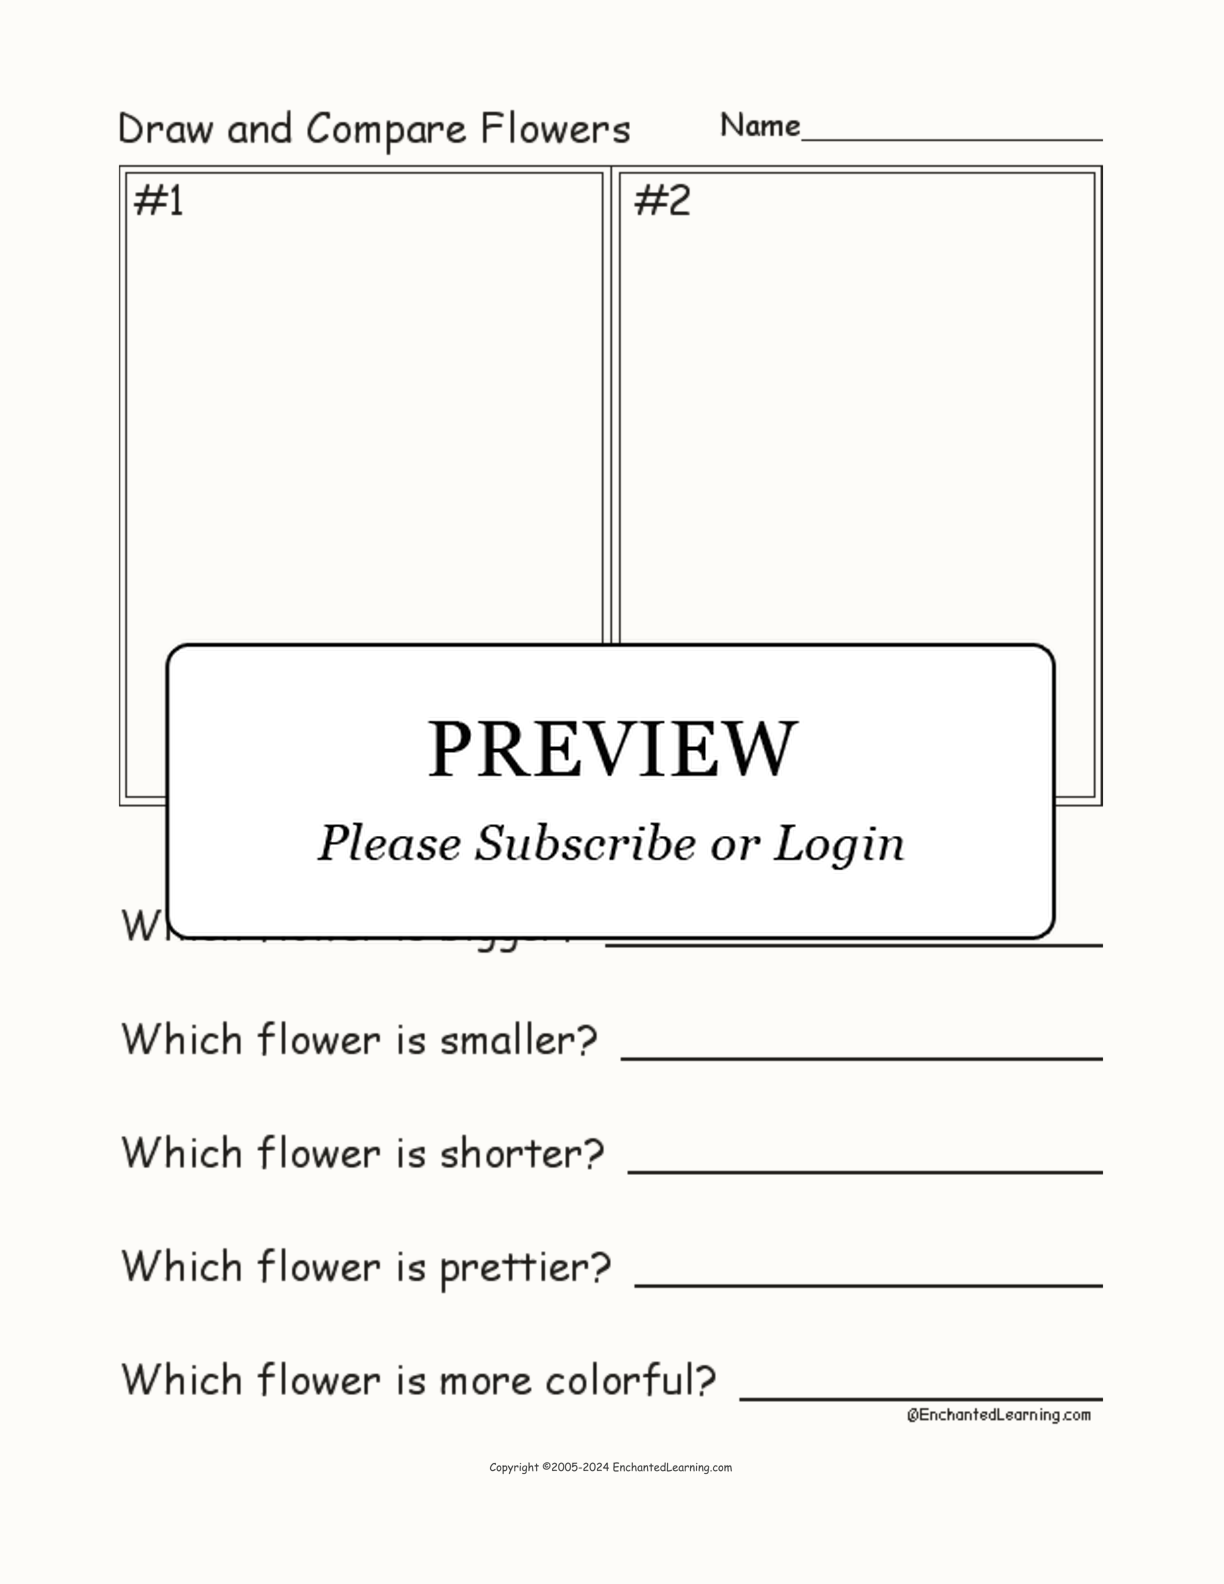 Draw and Compare Flowers interactive worksheet page 1